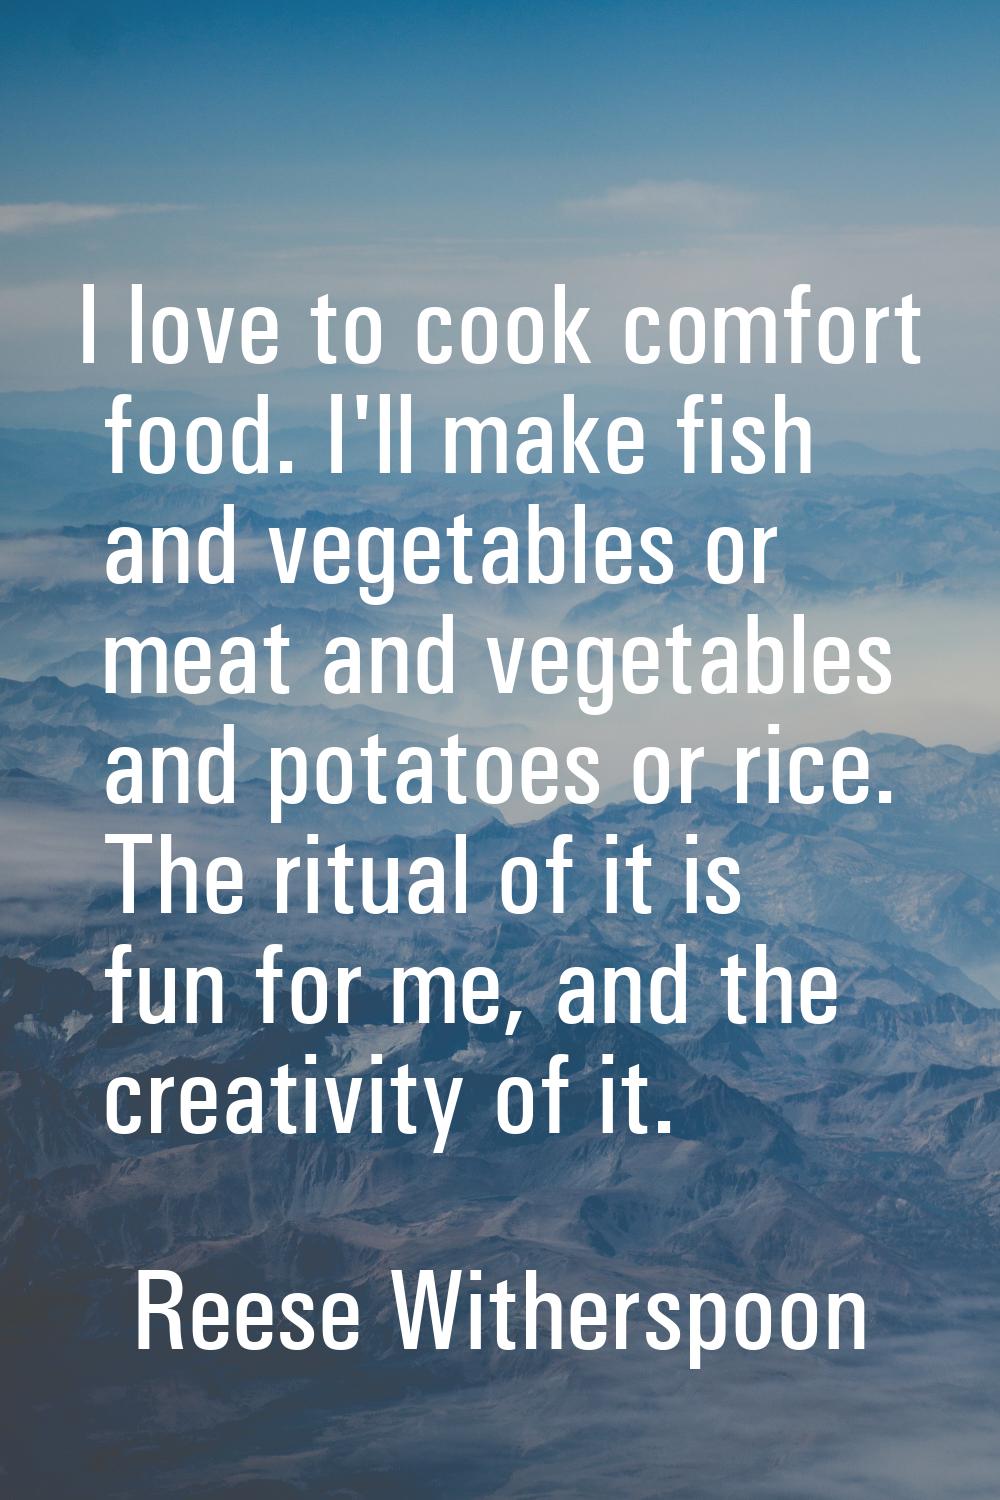 I love to cook comfort food. I'll make fish and vegetables or meat and vegetables and potatoes or r